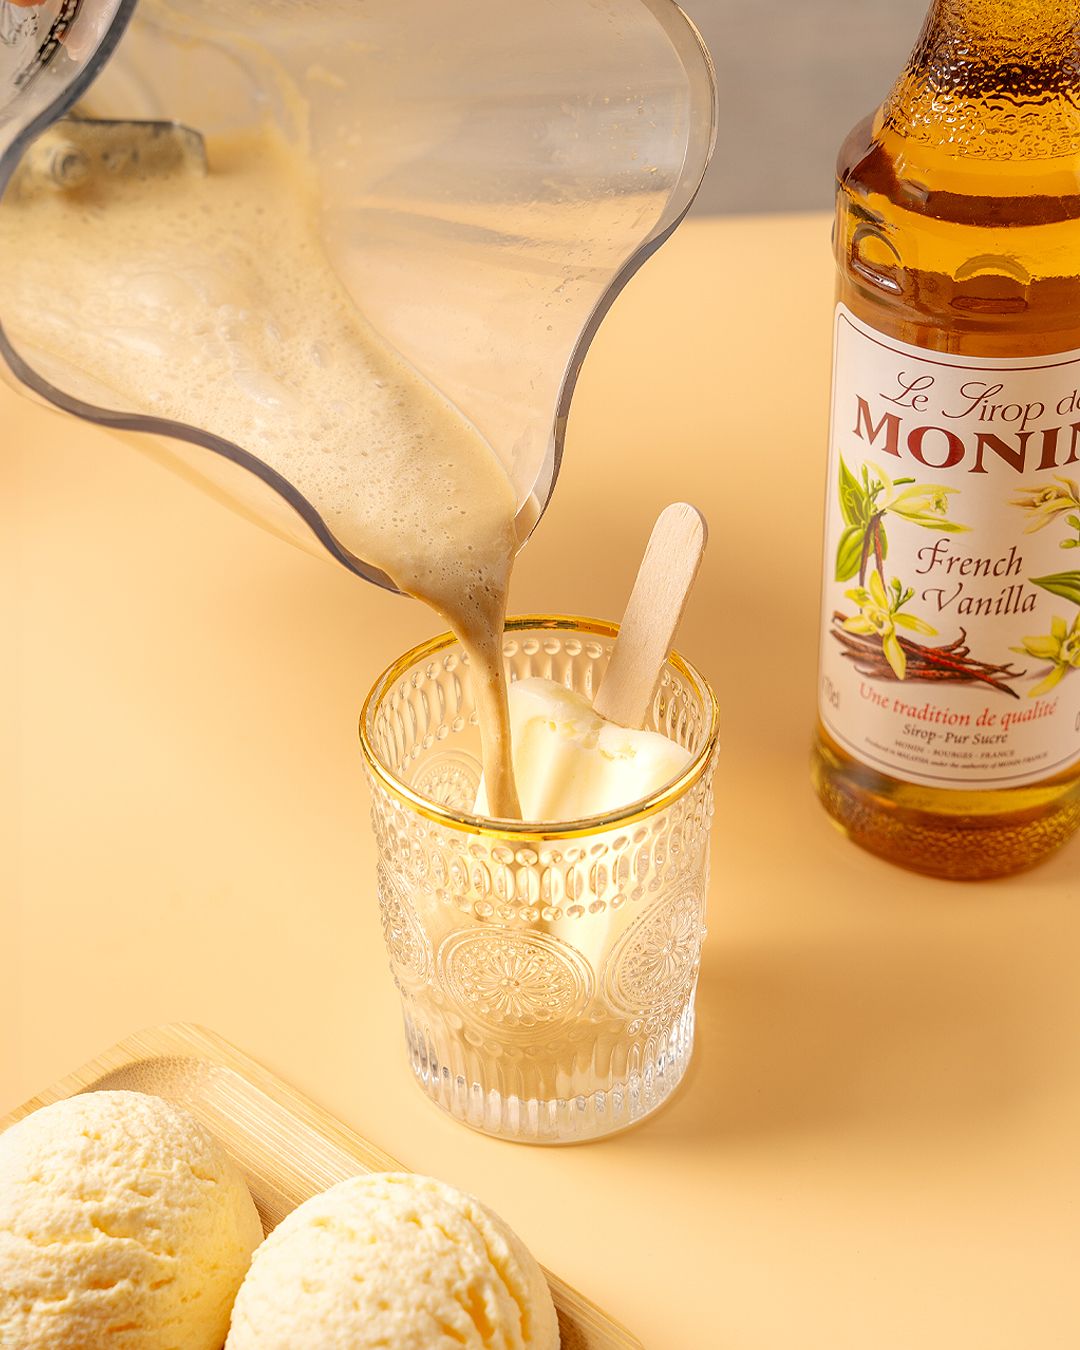 Sip Through the Day: MONIN's Smoothie Creations for Every Palate